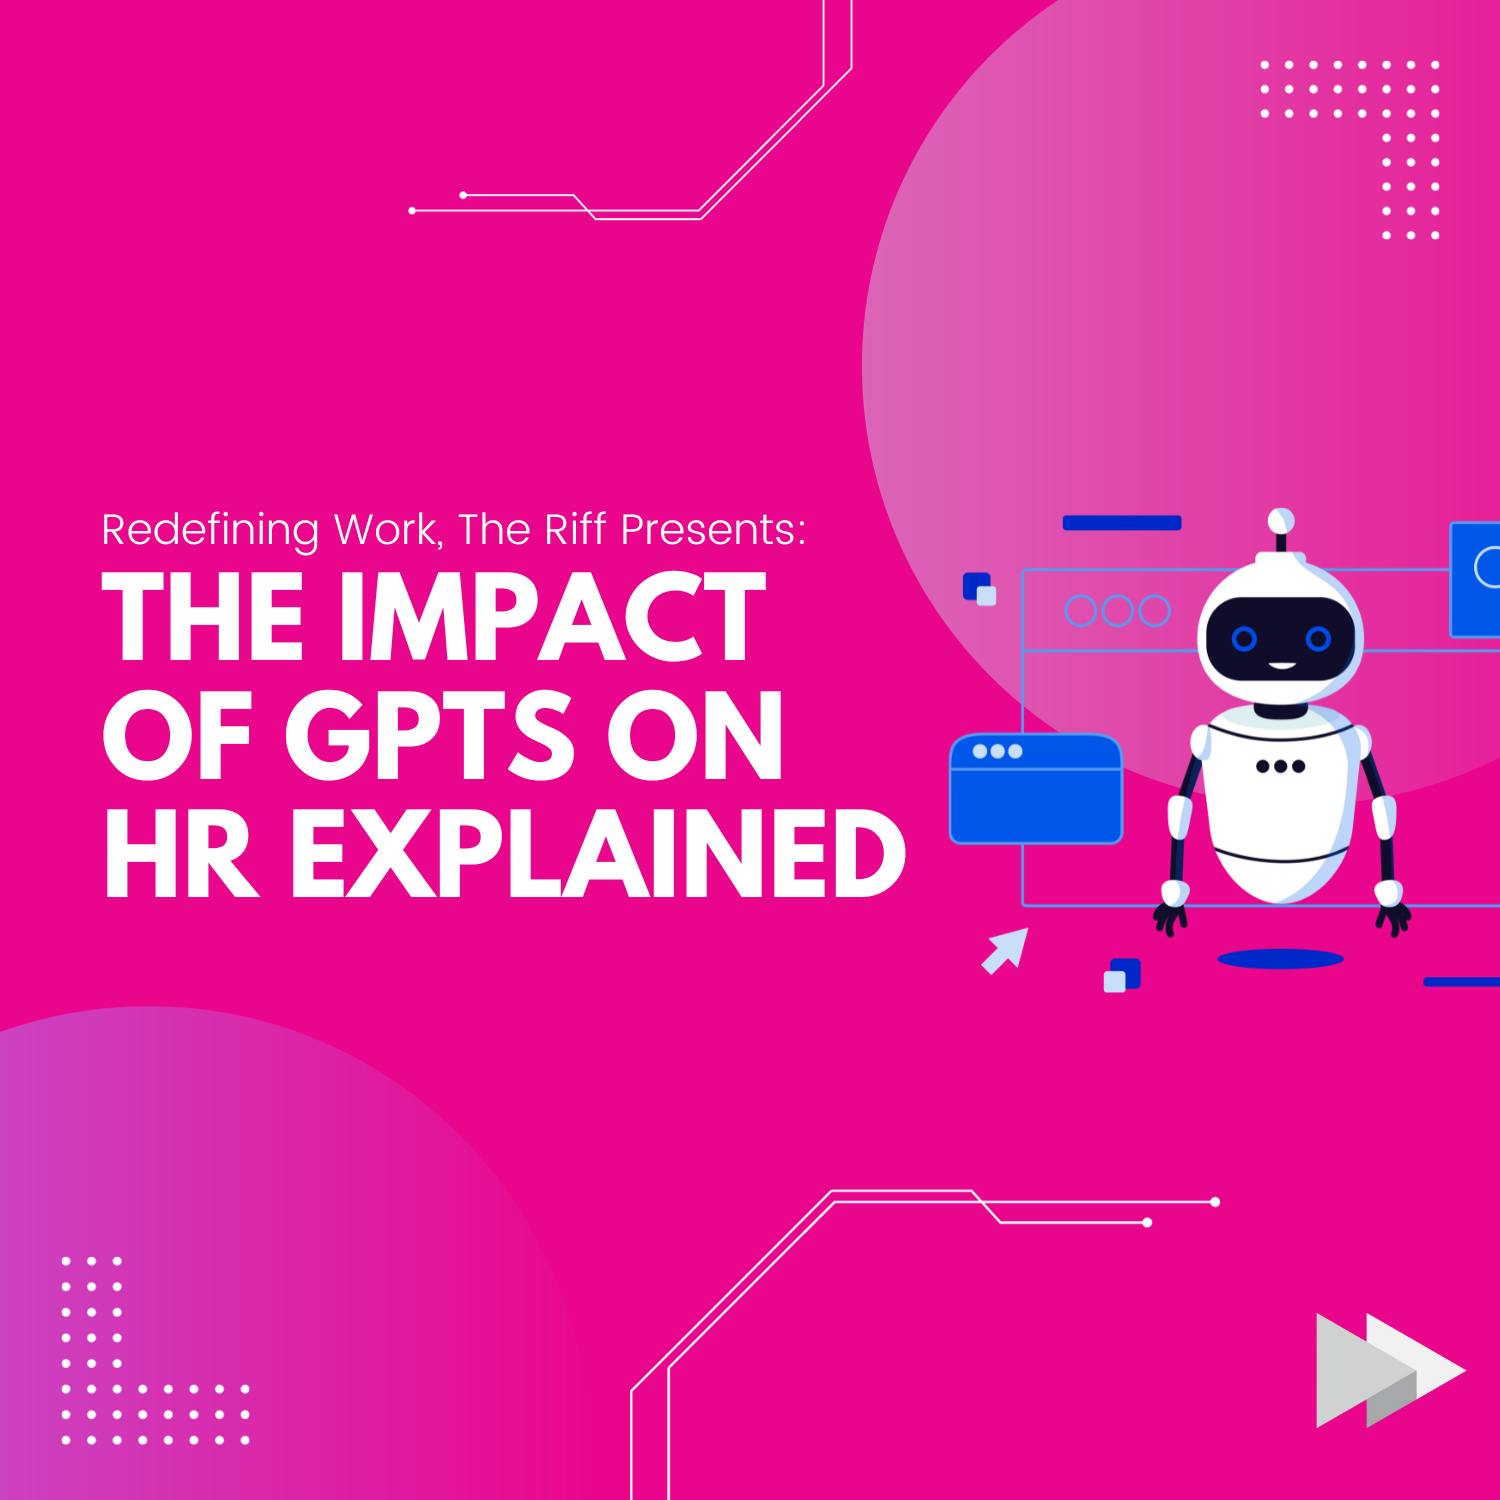 The Impact of GPTs on HR Explained